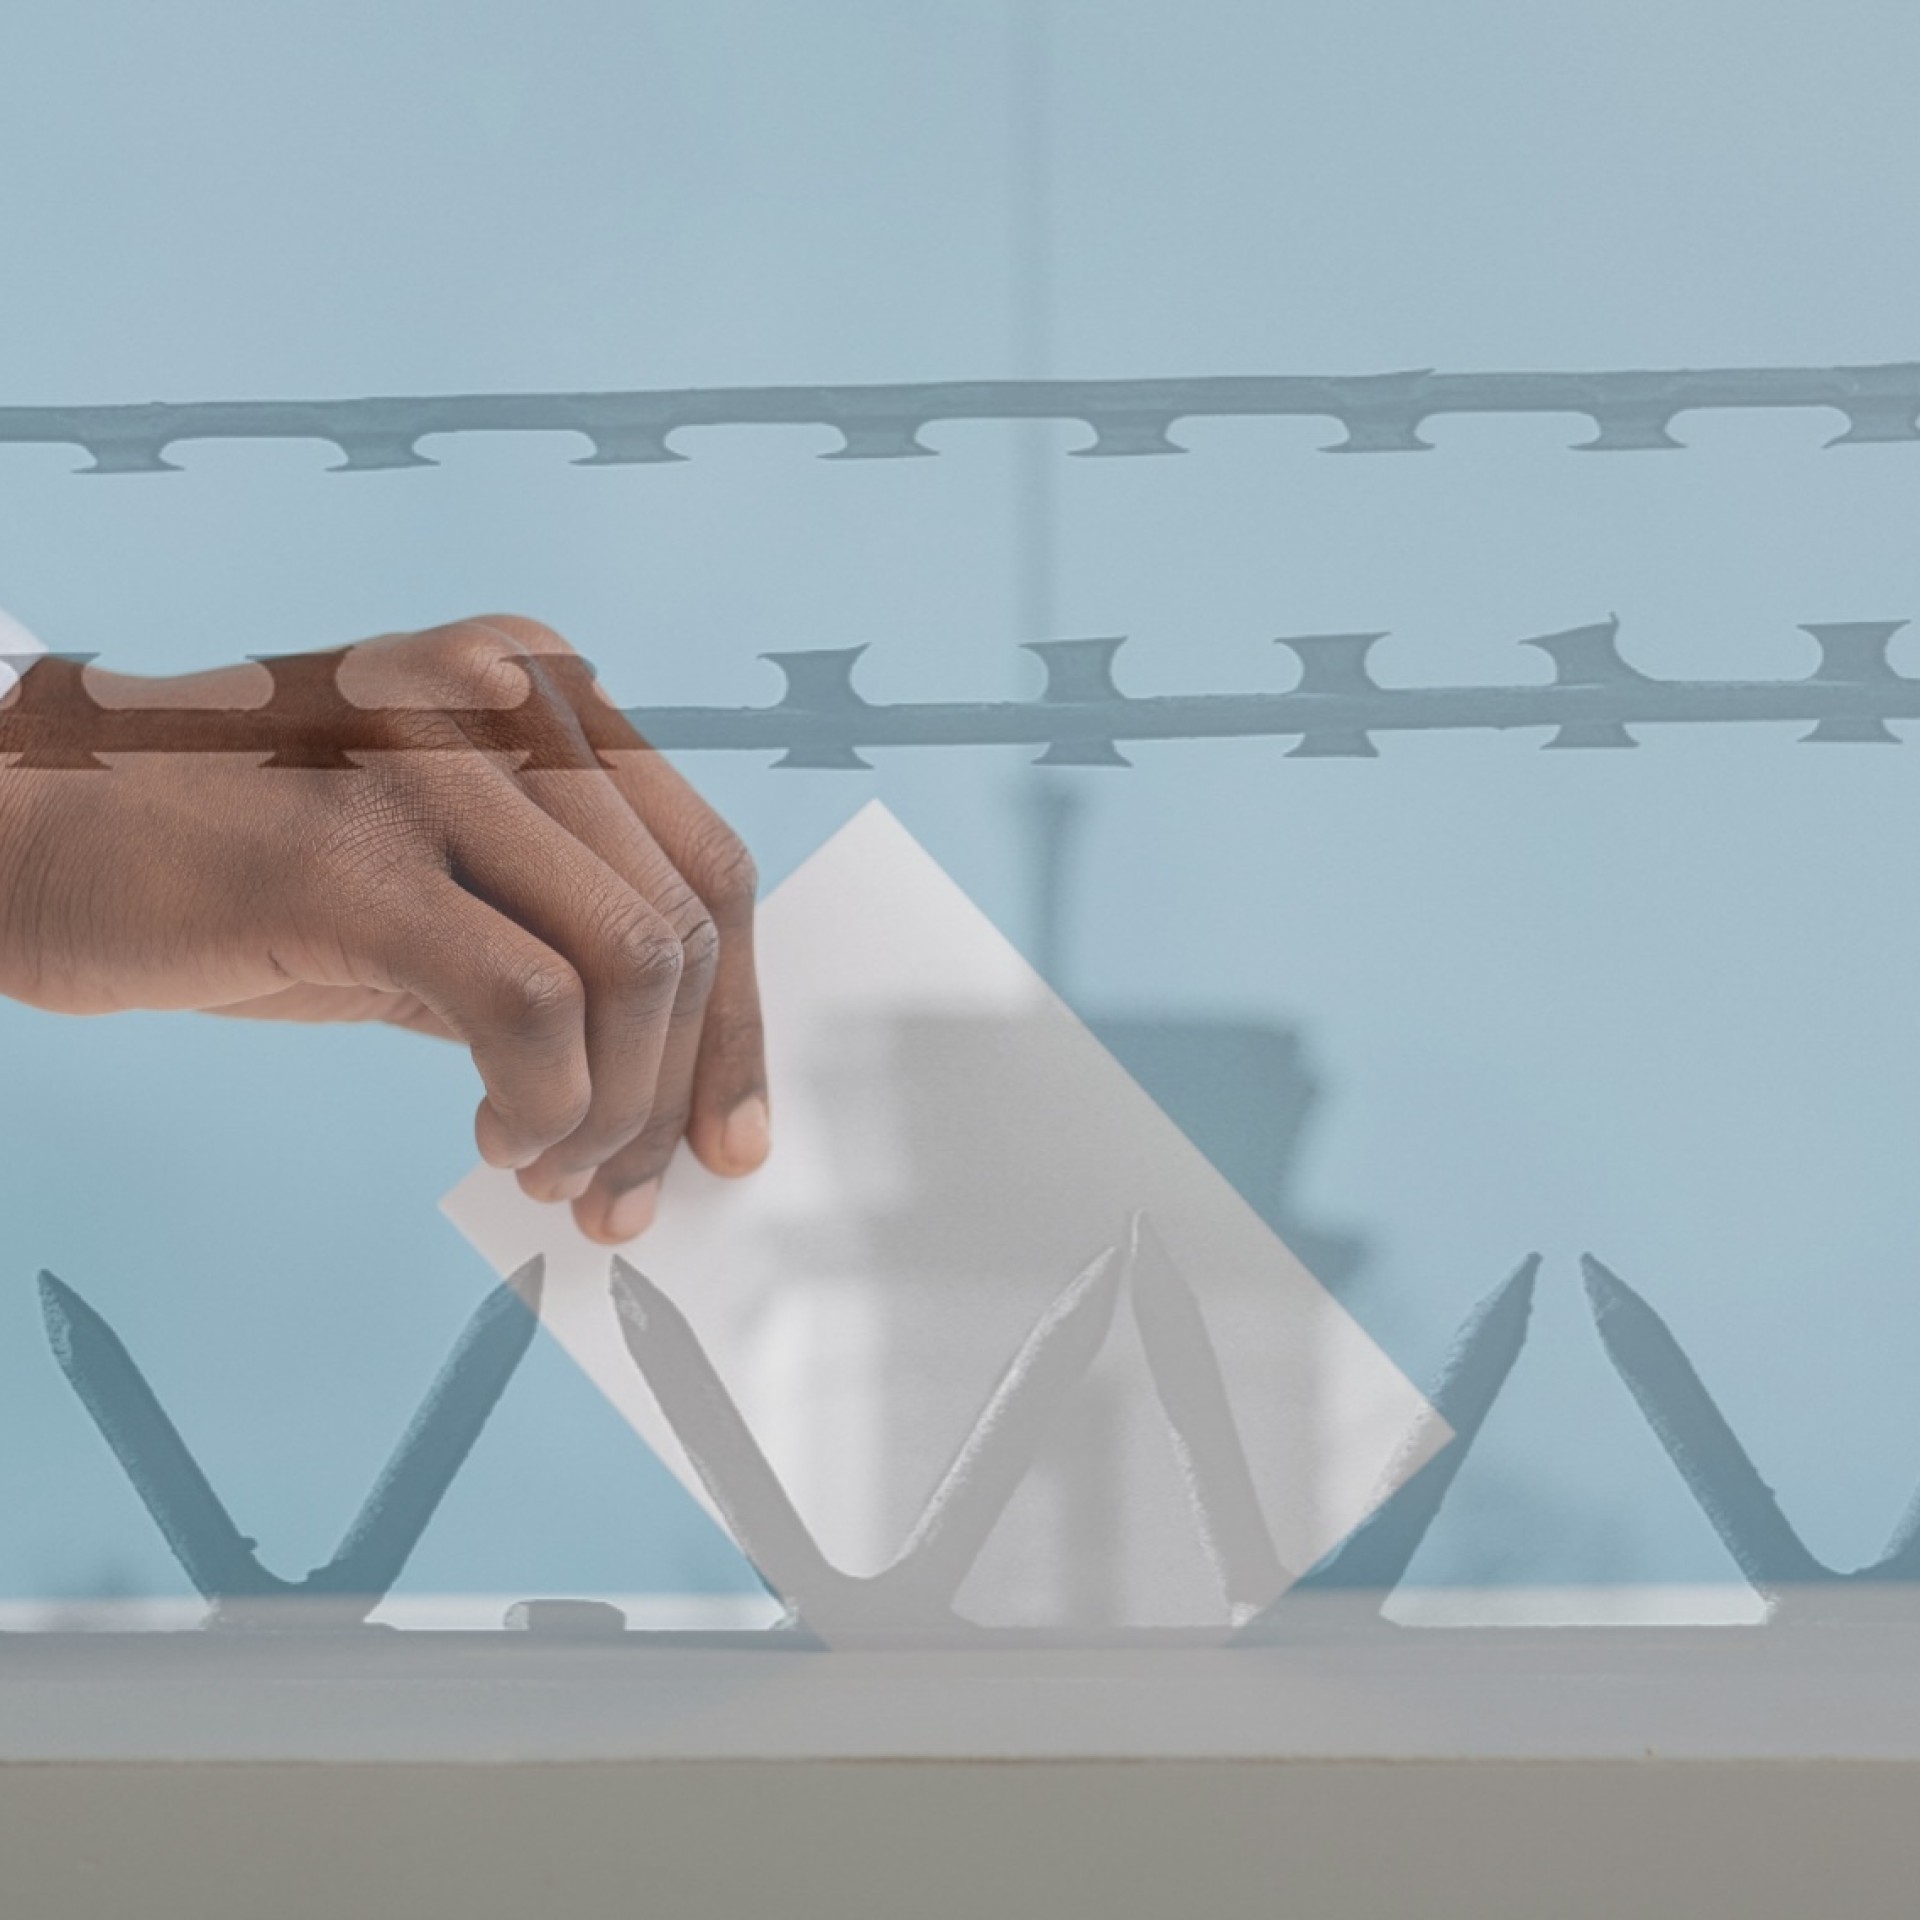 image shows a hand putting a ballot into a ballot box juxtaposed over a transparent image of spikes on prison wall and razor wire